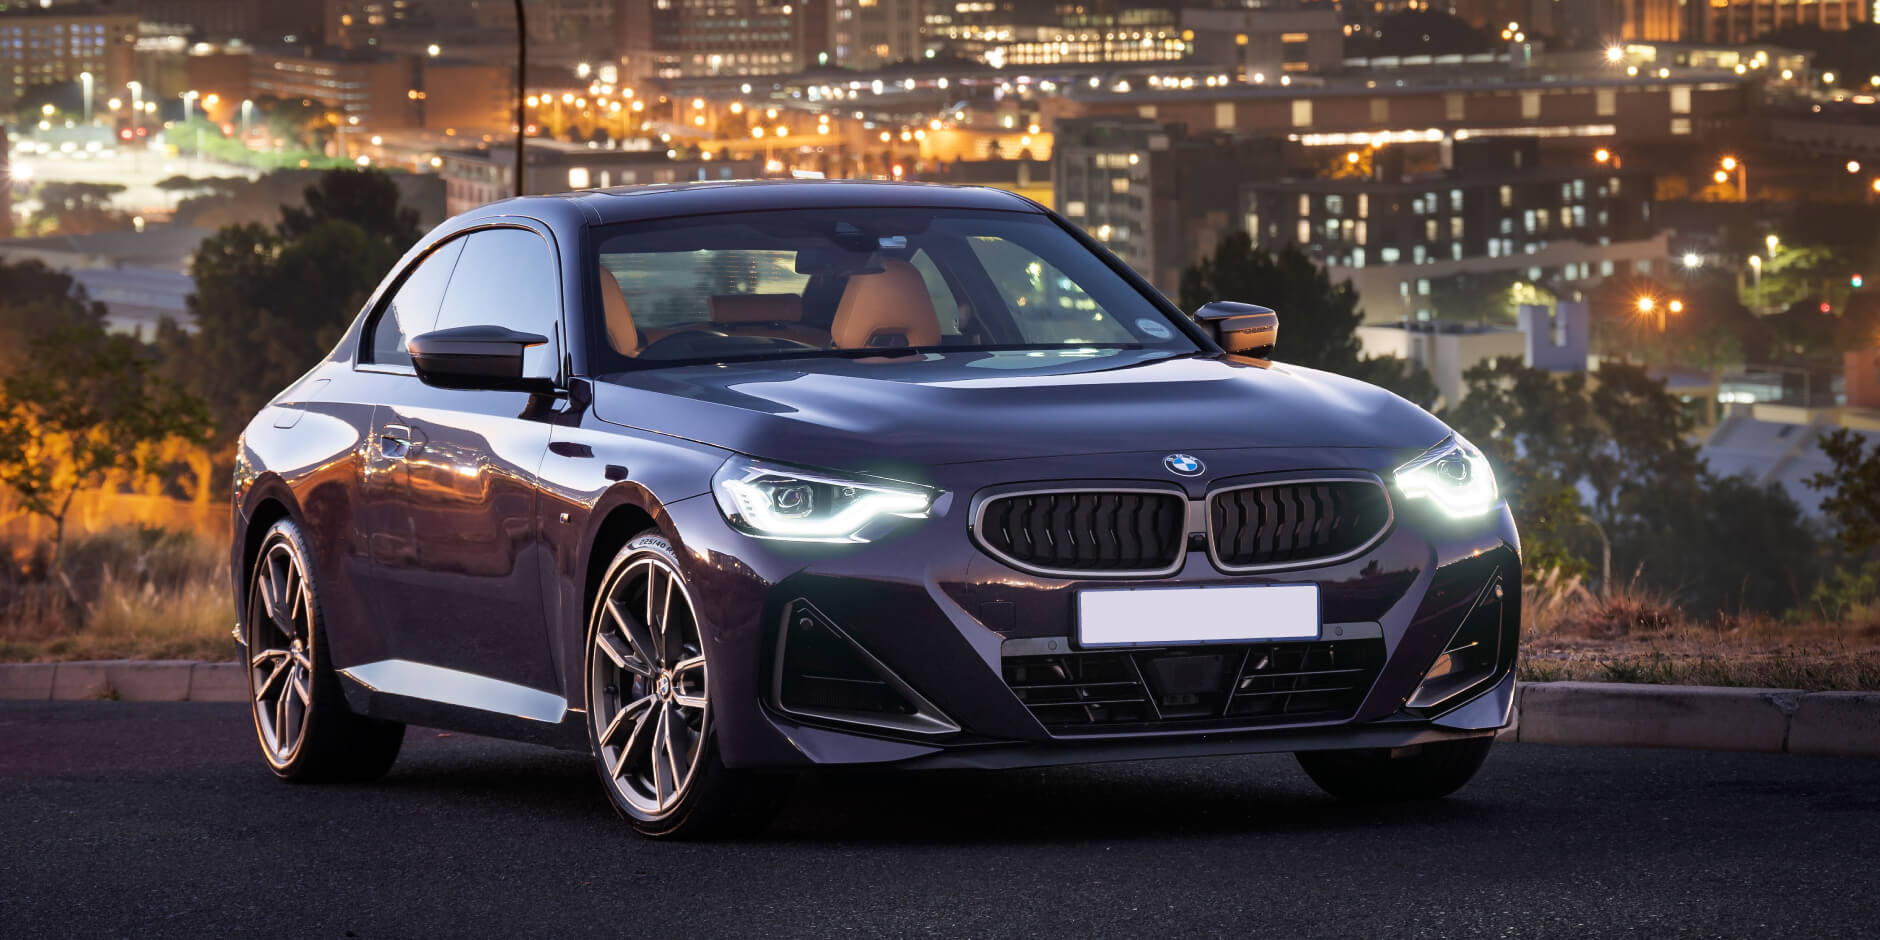 The Ultimate UK Road Trip: Top BMW Sports Cars for Performance and Luxury